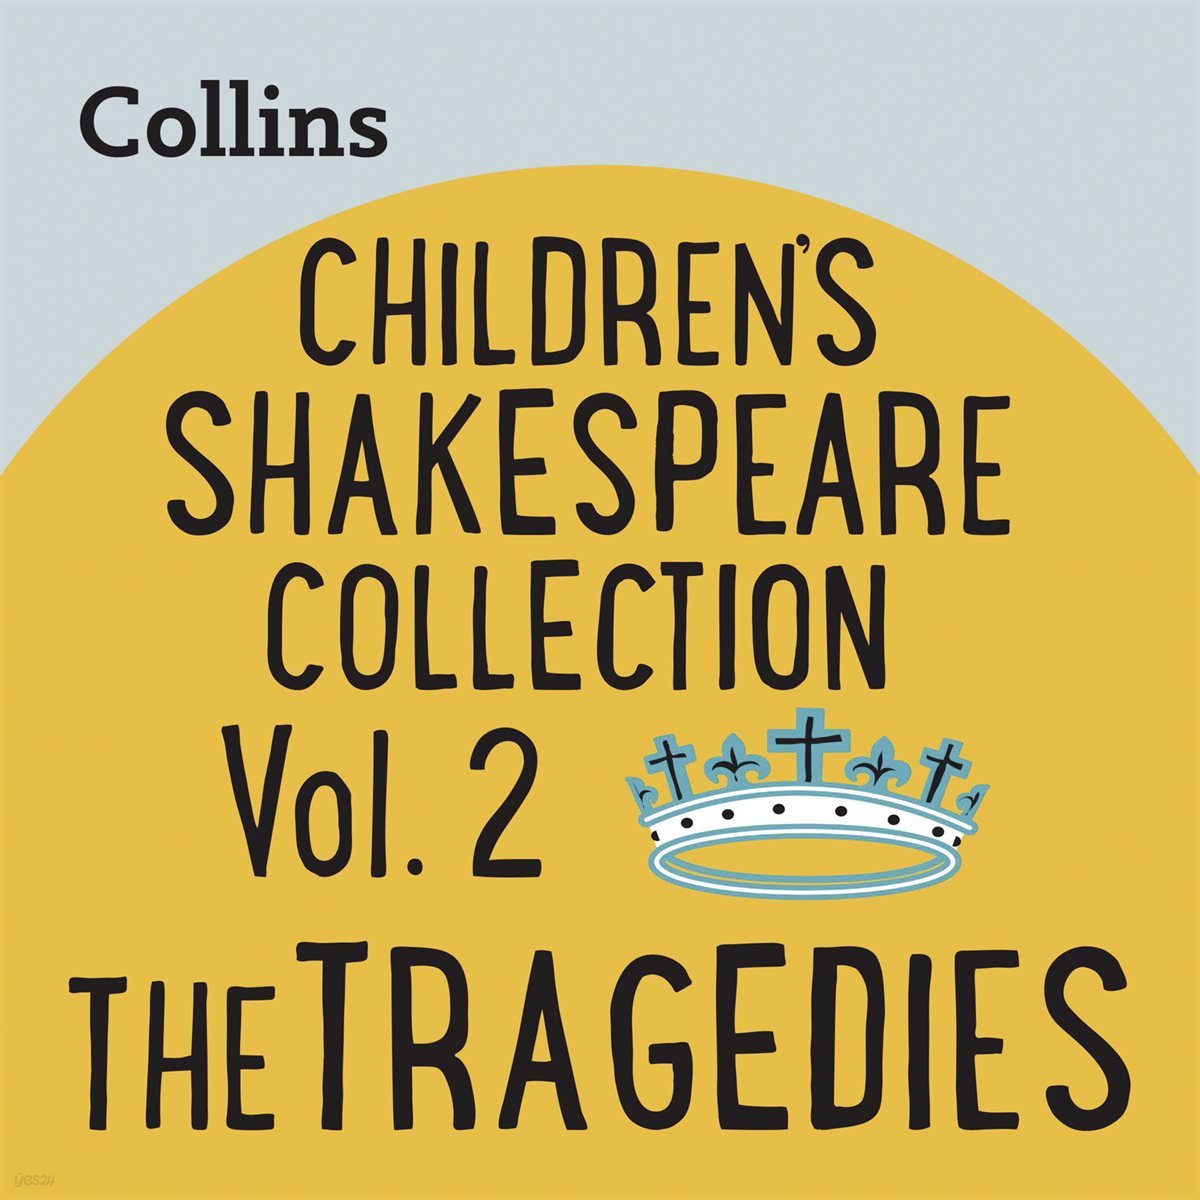 [US Eng] CHILDREN’S SHAKESPEARE COLLECTION VOL.2: THE TRAGEDIES: For ages 7-11 -Collins